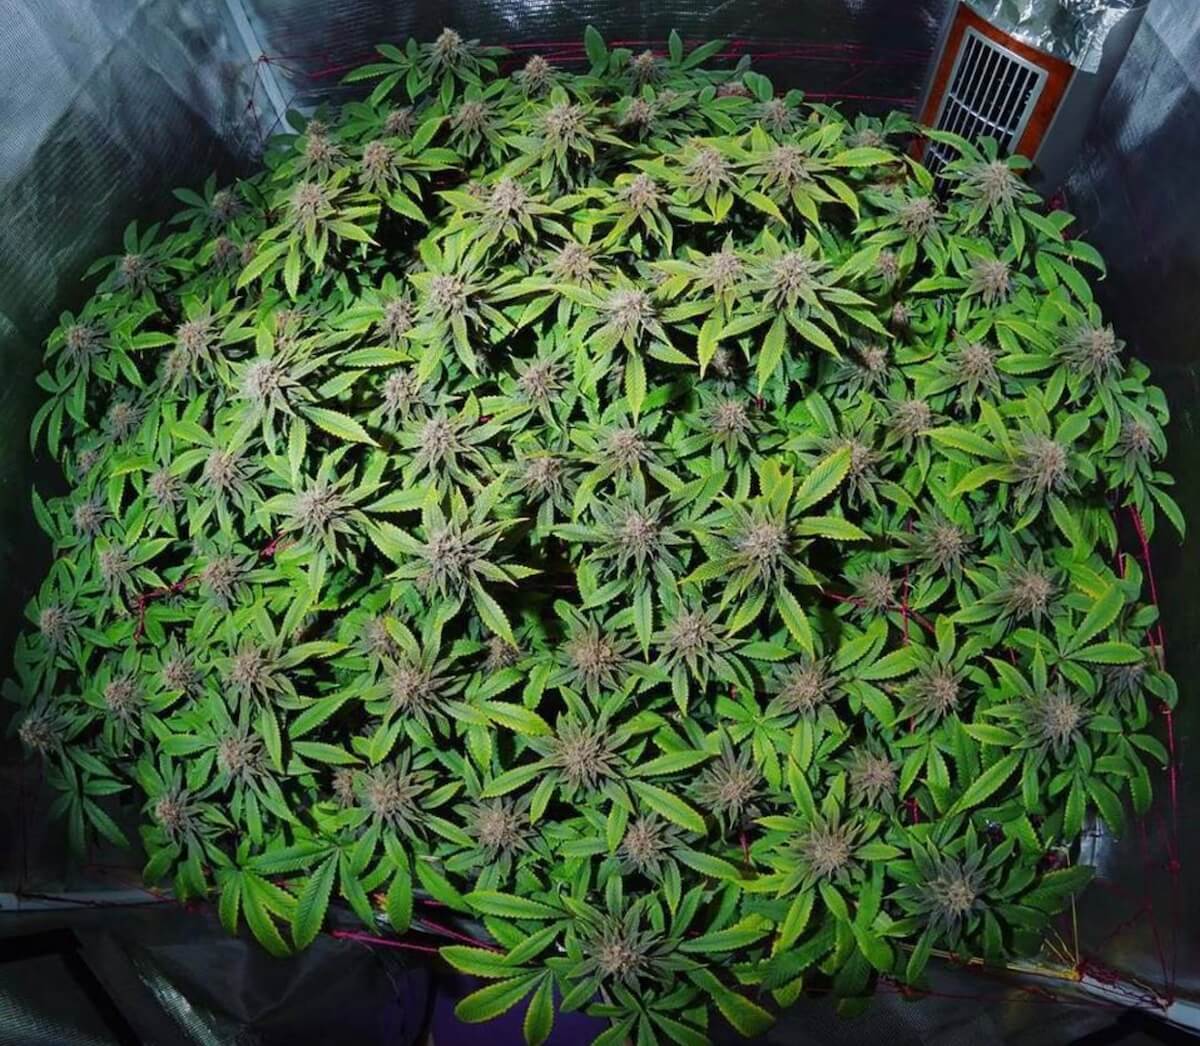 Bud Porn: Who's got the biggest?